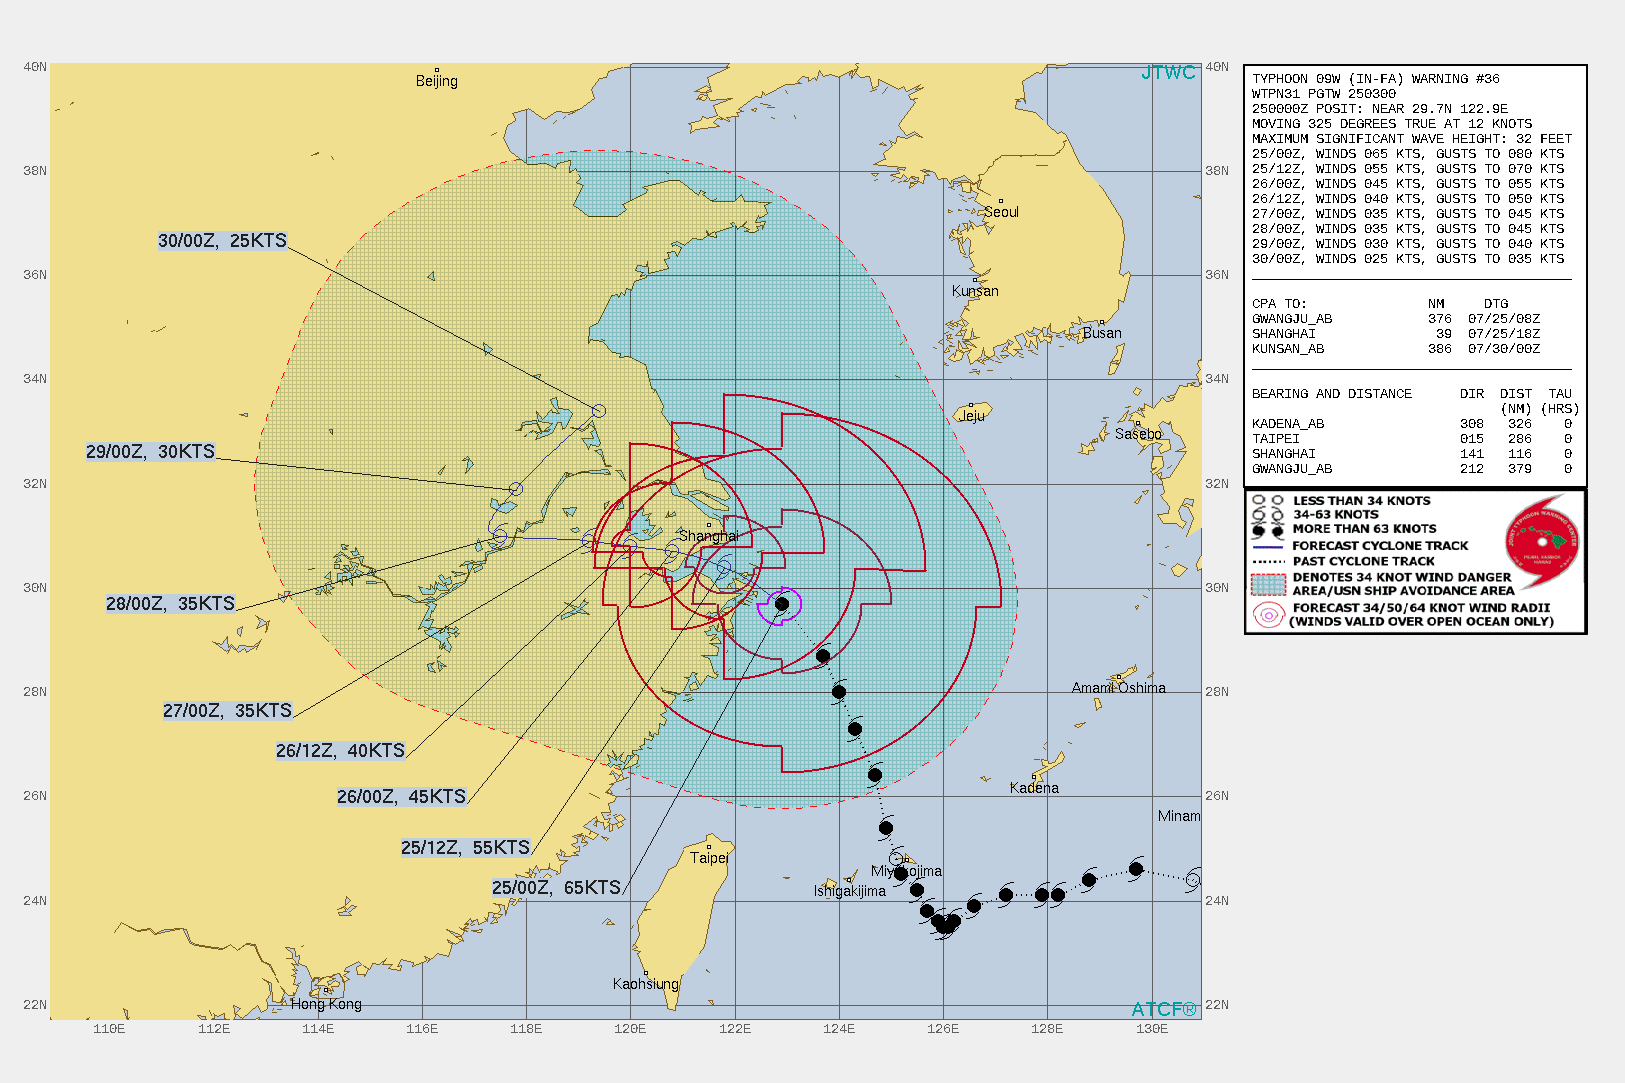 09W(IN-FA). WARNING 36 ISSUED AT 25/03UTC.THERE ARE NO SIGNIFICANT CHANGES TO THE FORECAST FROM THE PREVIOUS WARNING.  FORECAST DISCUSSION: TYPHOON 09W WILL TURN MORE WESTWARD AFTER  12H AND MAKE LANDFALL JUST SOUTH OF SHANGHAI, TRACK INLAND, THEN RECURVE NORTHEASTWARD AFTER 72H IF IT MAINTAINS ITS LOW LEVEL STRUCTURE. THE DEGRADING ENVIRONMENT CAUSED BY COOLING SSTS AND LAND INTERACTION WILL GRADUALLY THEN RAPIDLY WEAKEN THE SYSTEM DOWN TO 25KNOTS BY 120H AS IT APPROACHES THE YELLOW SEA.